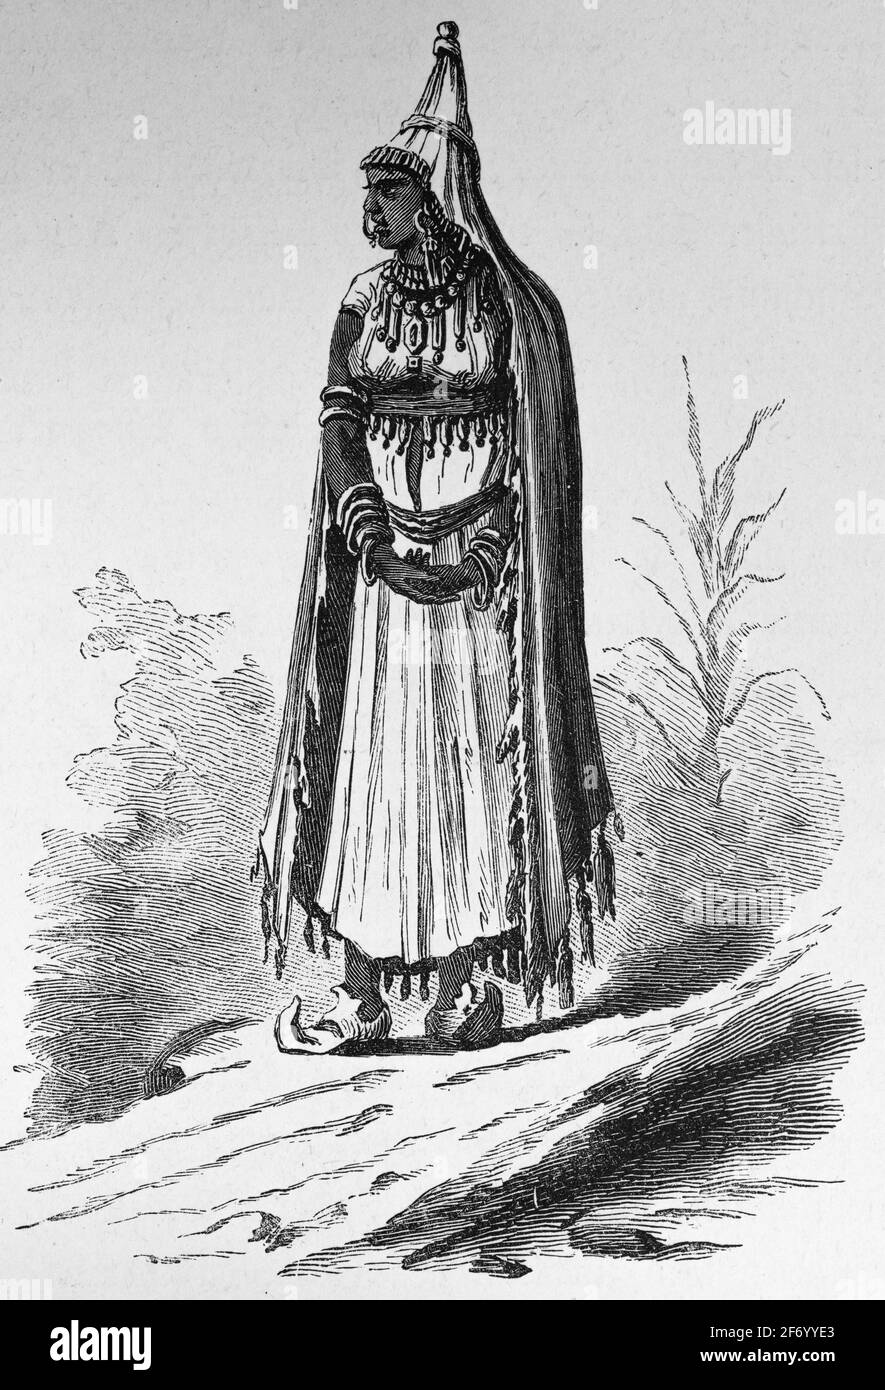 Banjara woman from the northern Indian state of Rajasthan in traditional dress, wood engraving, Wien. Leipzig 1881 Stock Photo